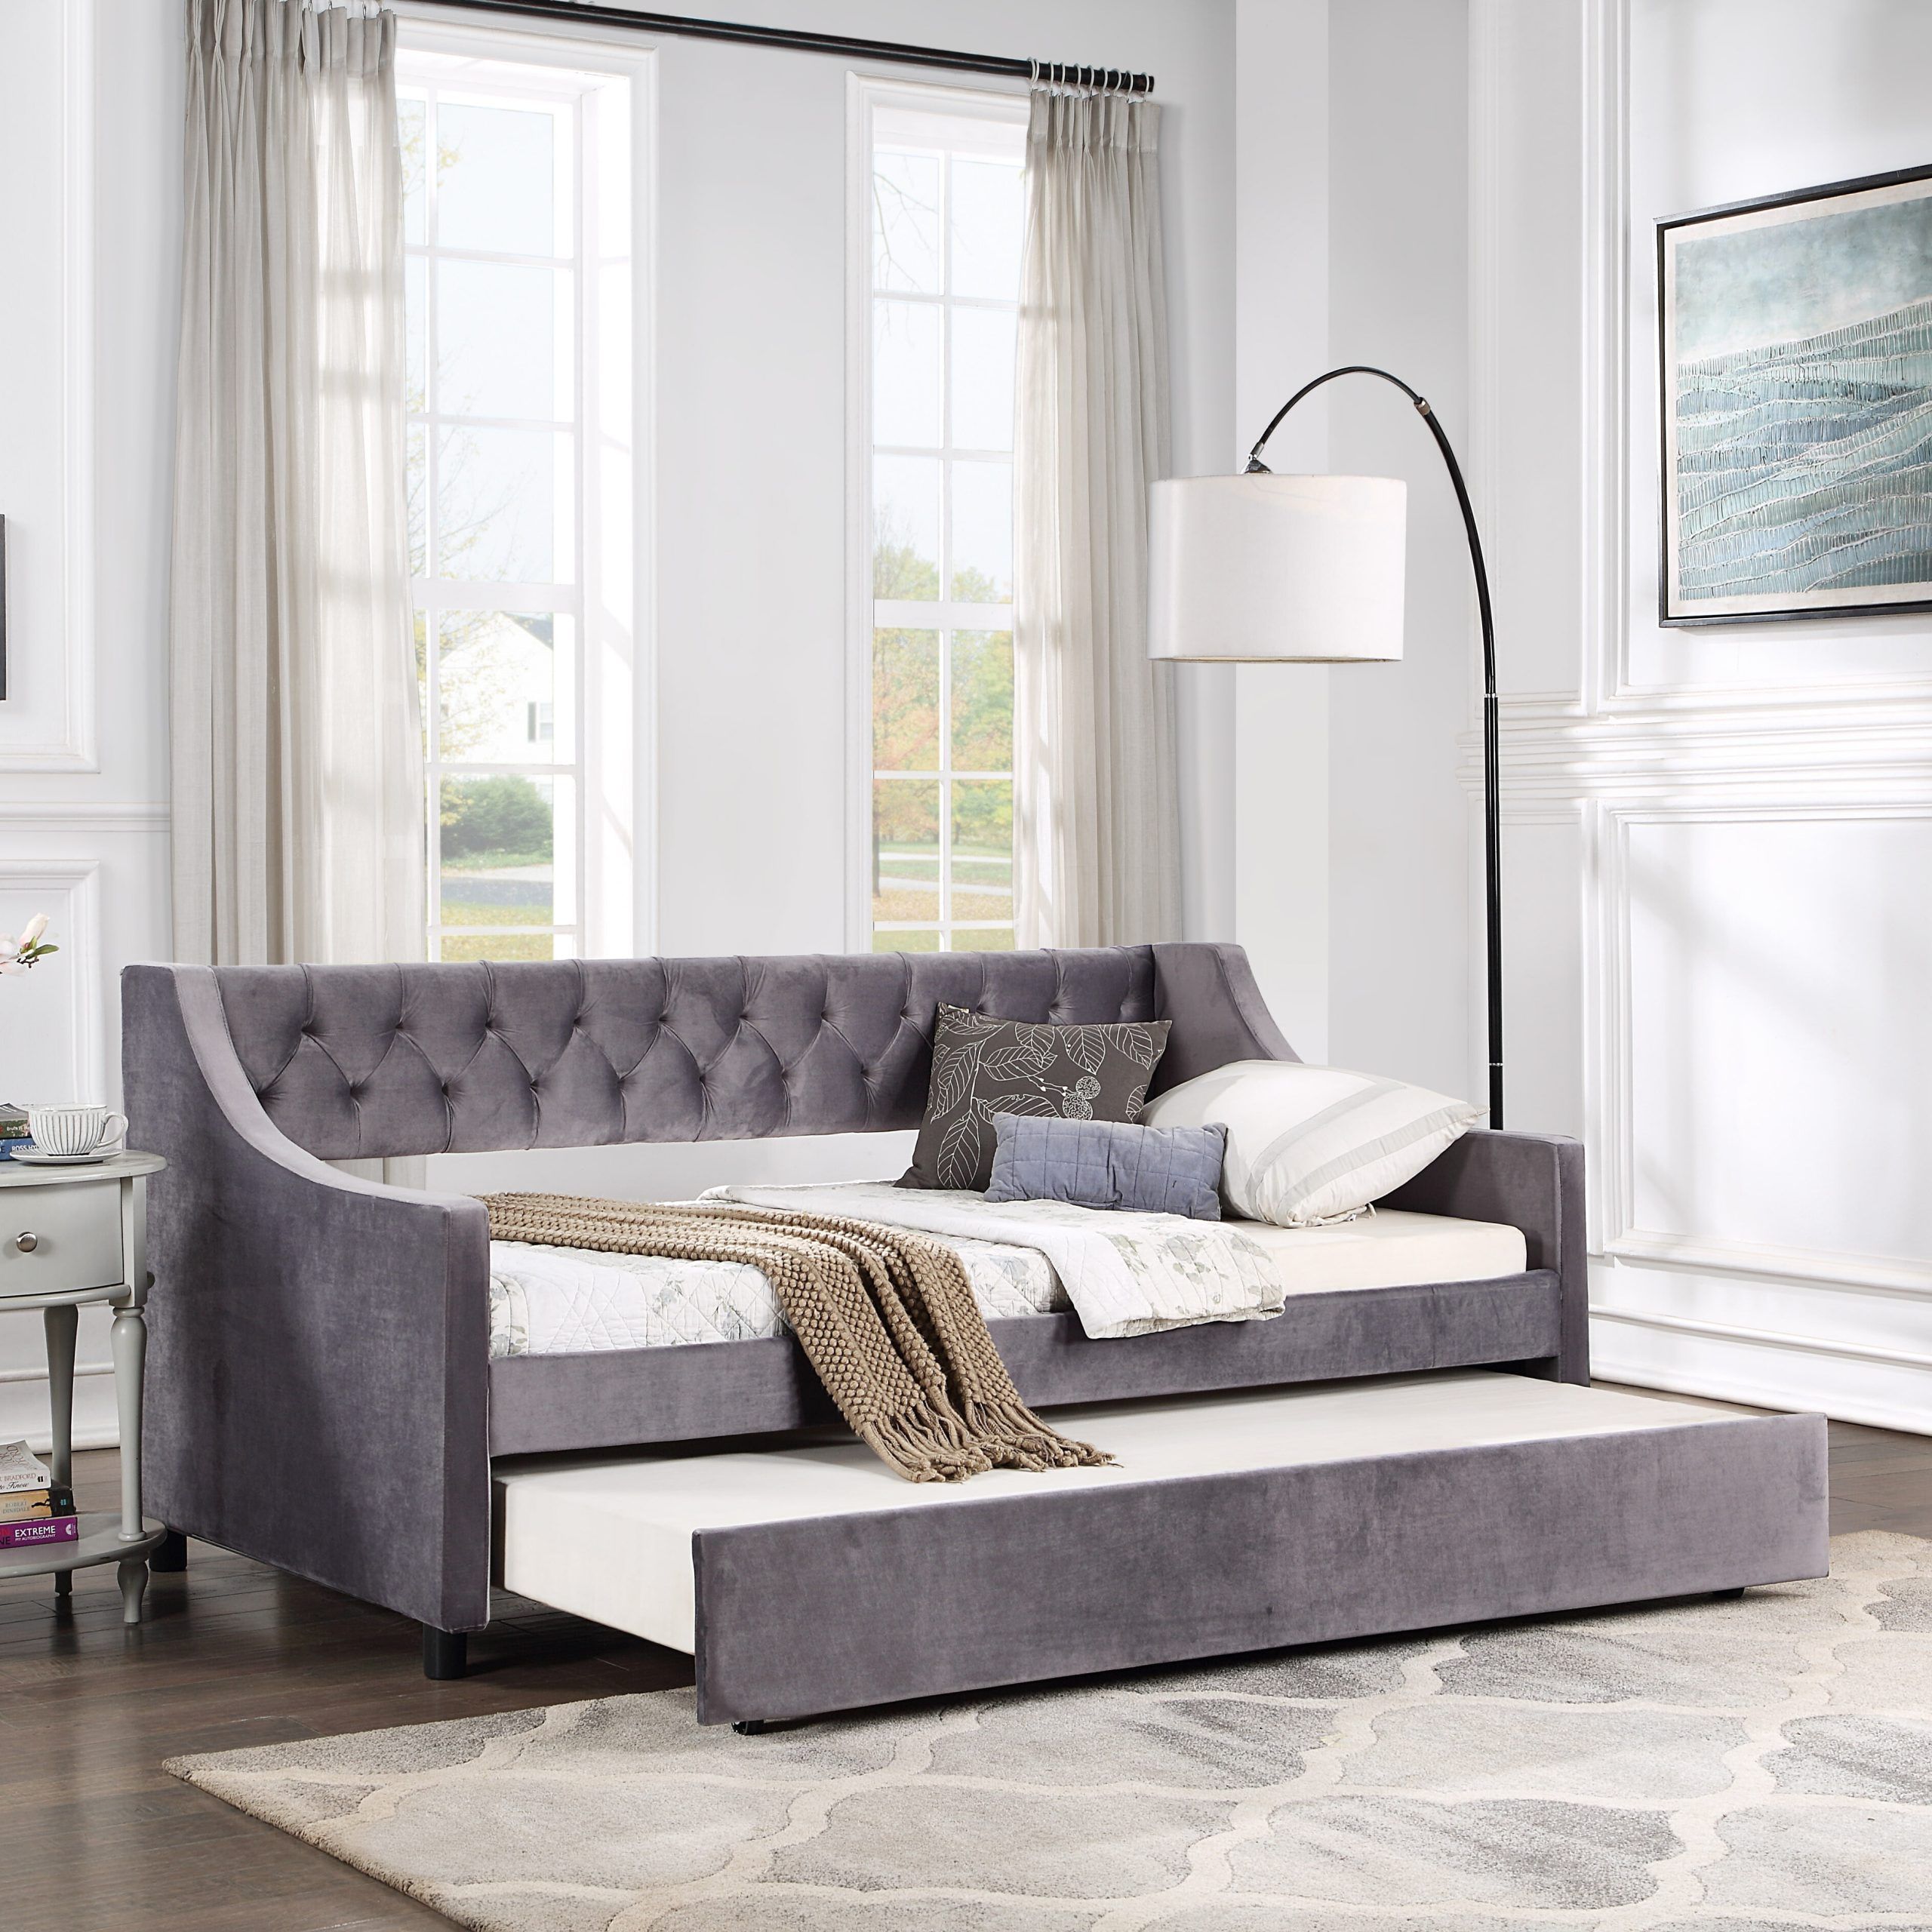 Overdrive Pull Out Sofa Bed With Upholstered Tufted Daybed Sleeper Sofa With 2 In 1 Gray Pull Out Sofa Beds (View 2 of 20)